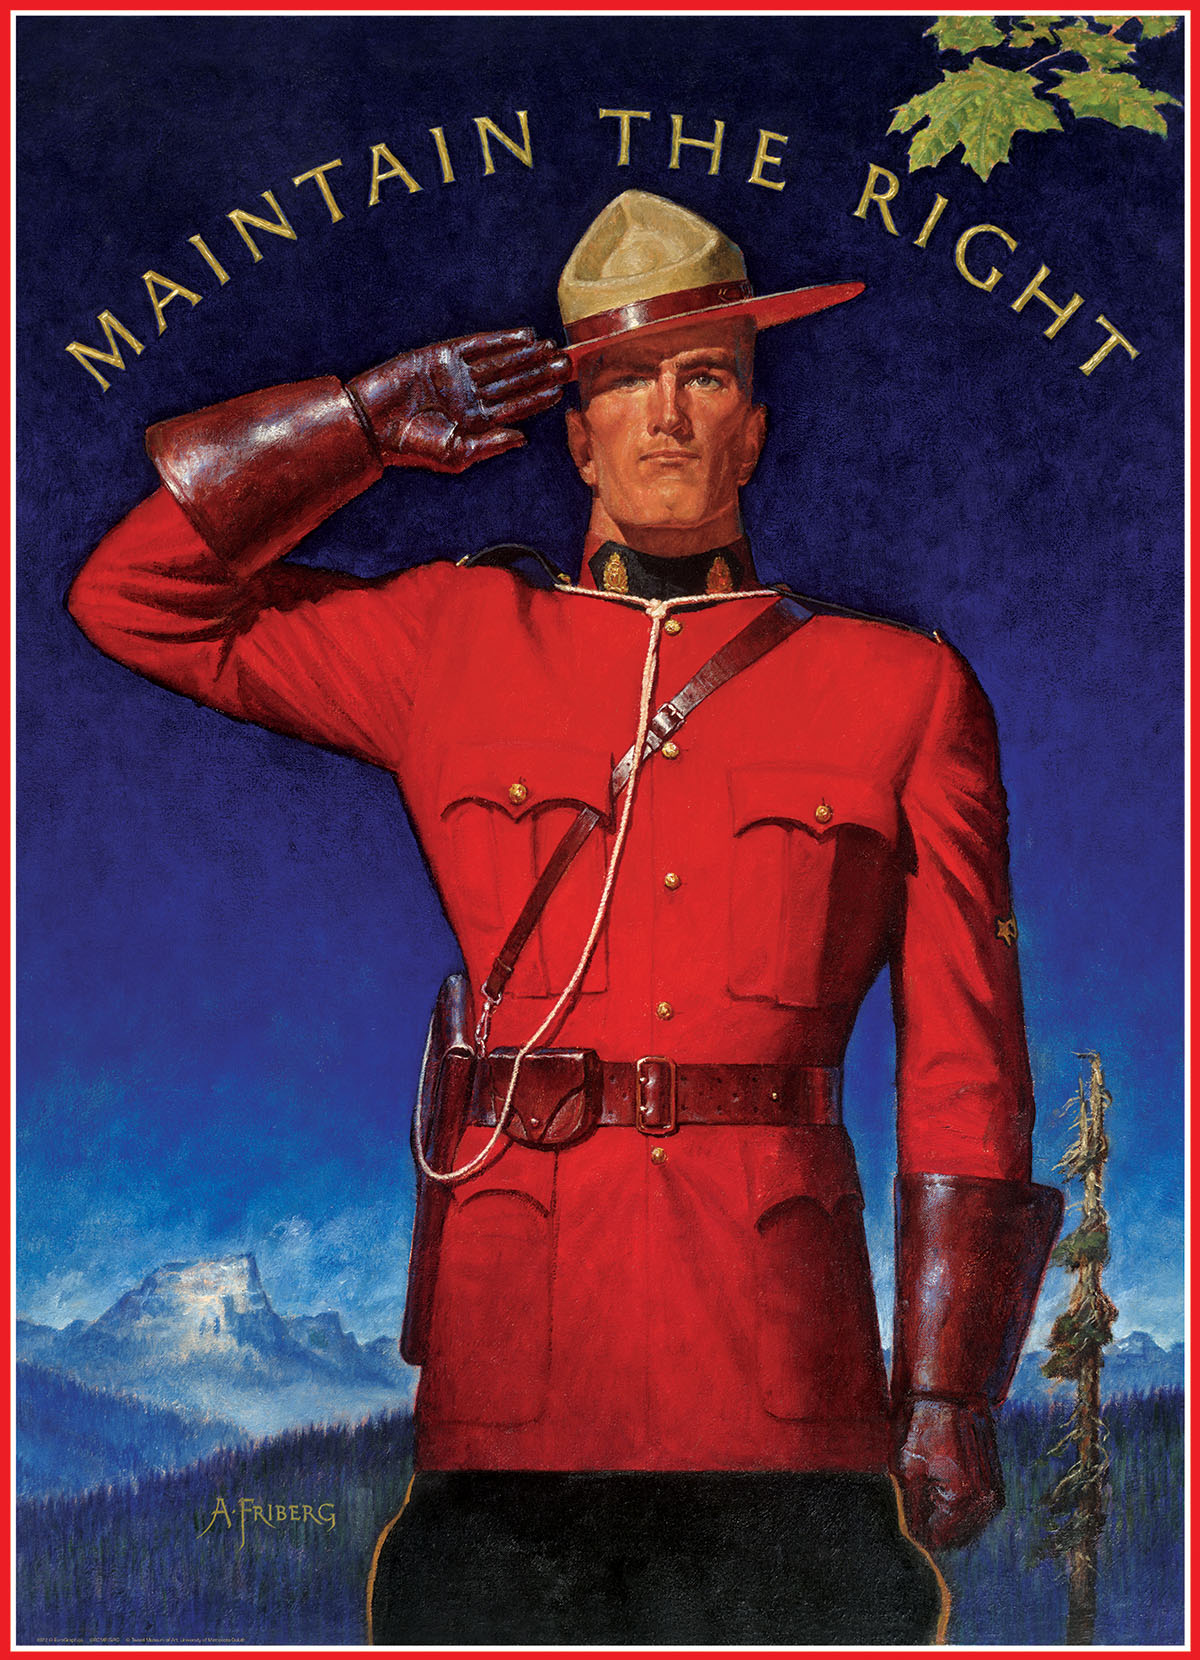 Eurographics 6000-0972 Royal Canadian Mounted Police - Maintain the Right - 1000 Piece Jigsaw Puzzle